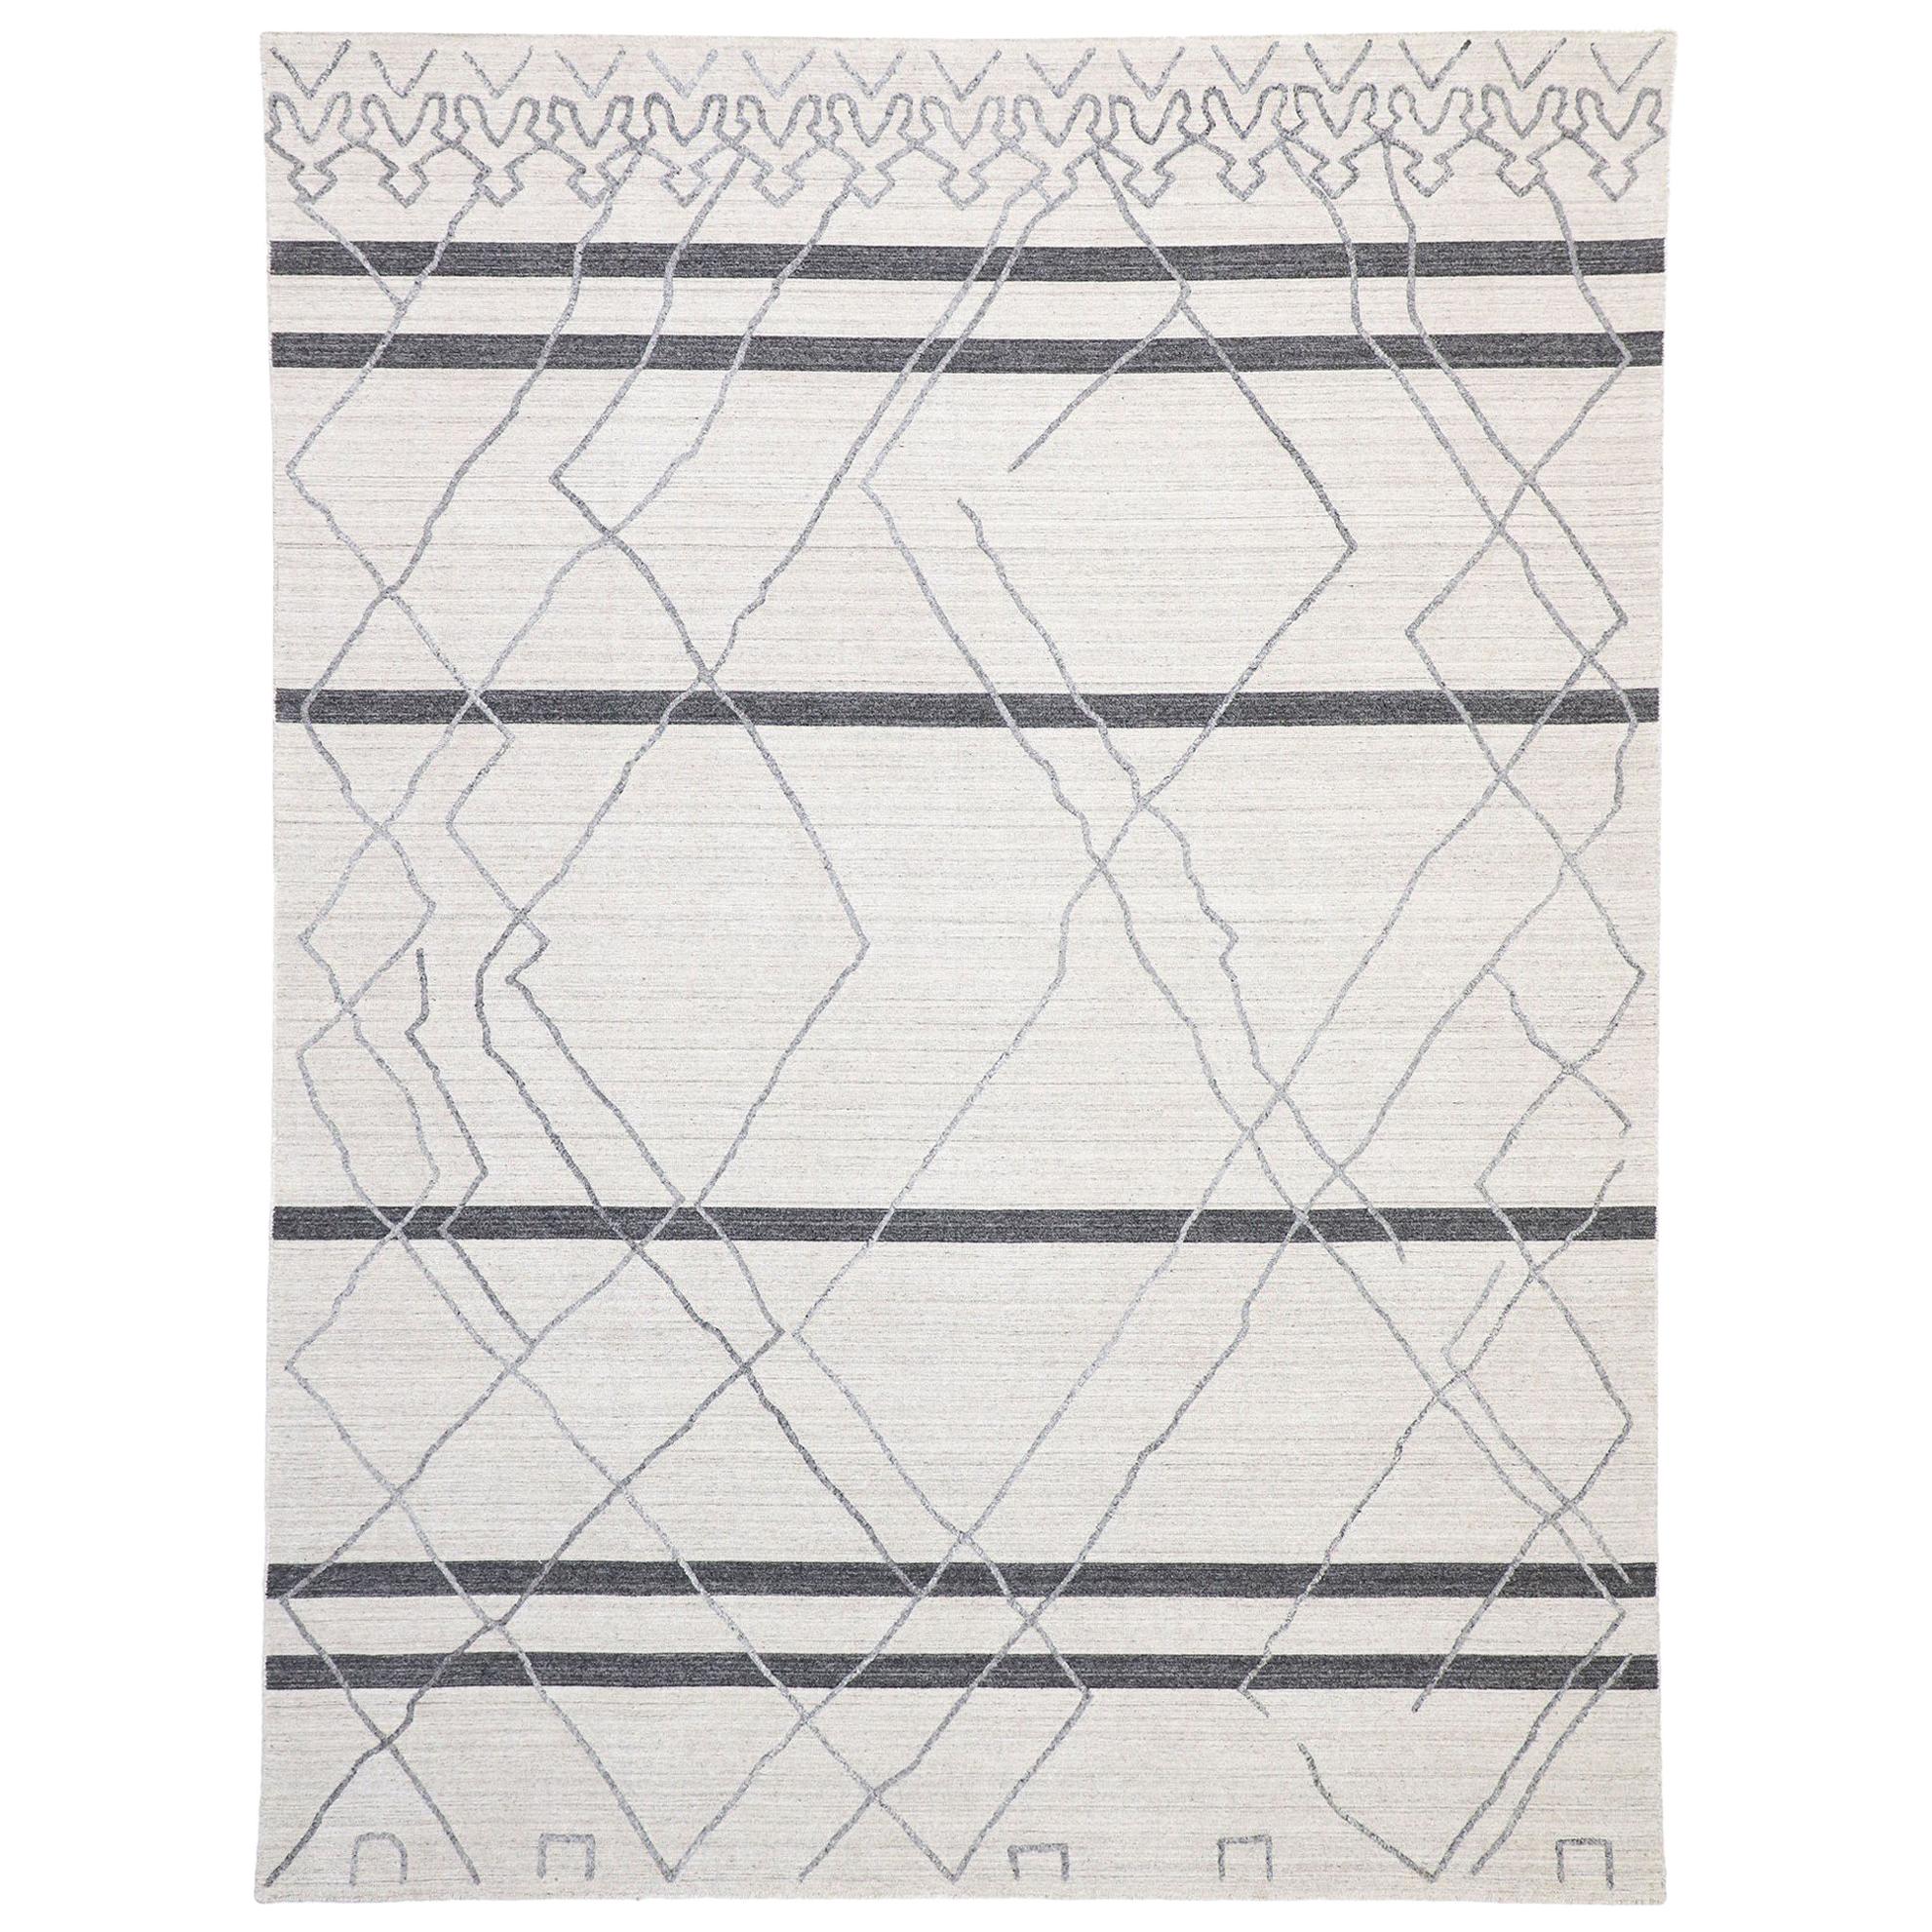 New Contemporary Gray Modern Moroccan Style Area Rug with Raised Design